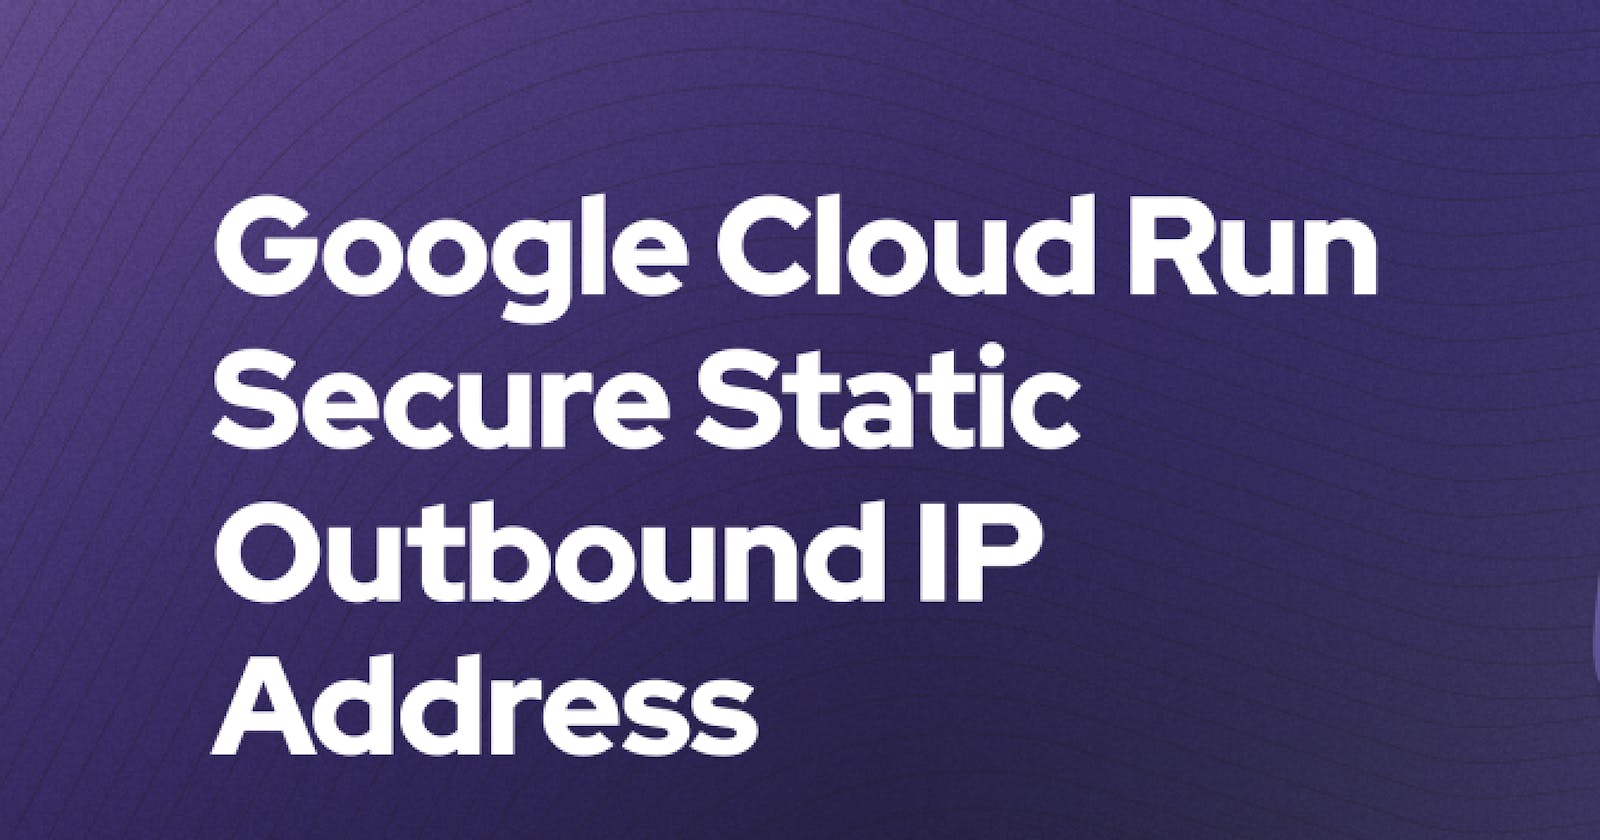 Appsmith On Google Cloud Run - Secure Static Outbound IP Address